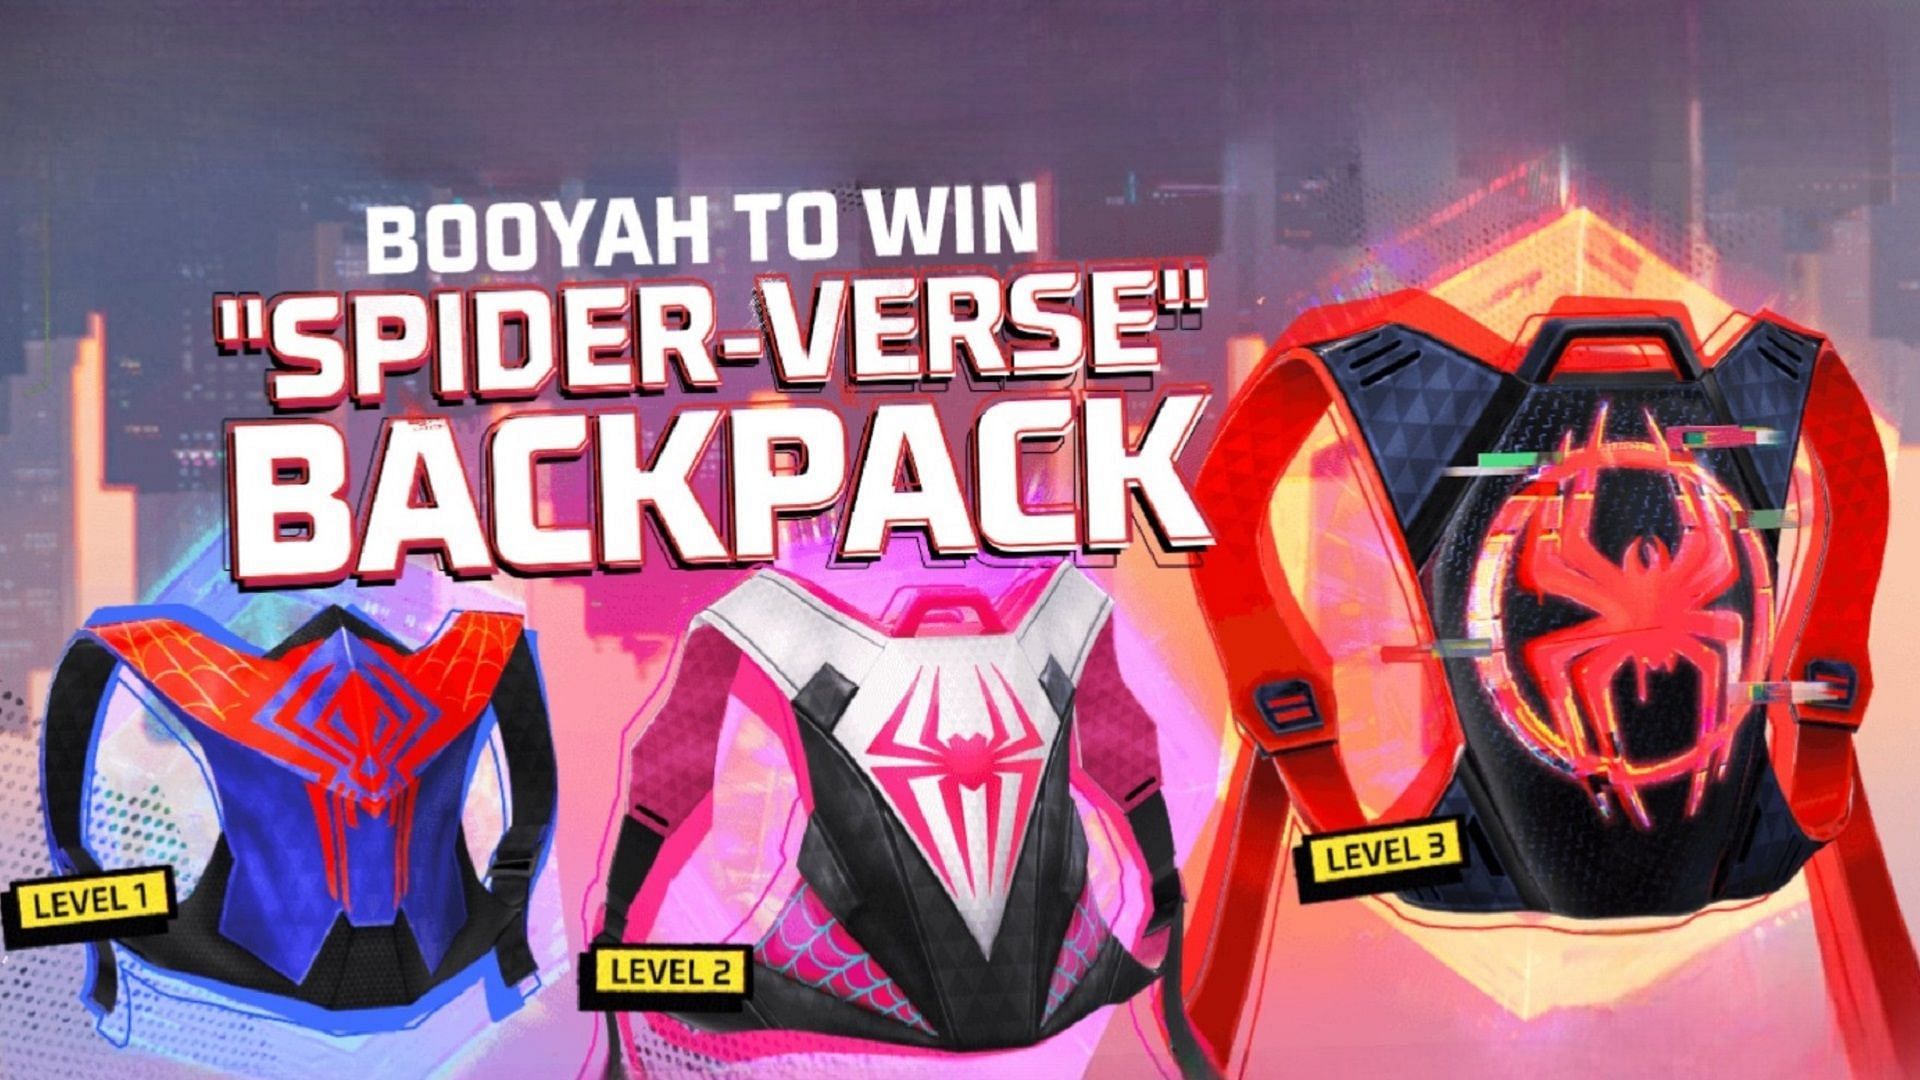 Spider-Verse Backpack is available for free in the game (Image via Garena)